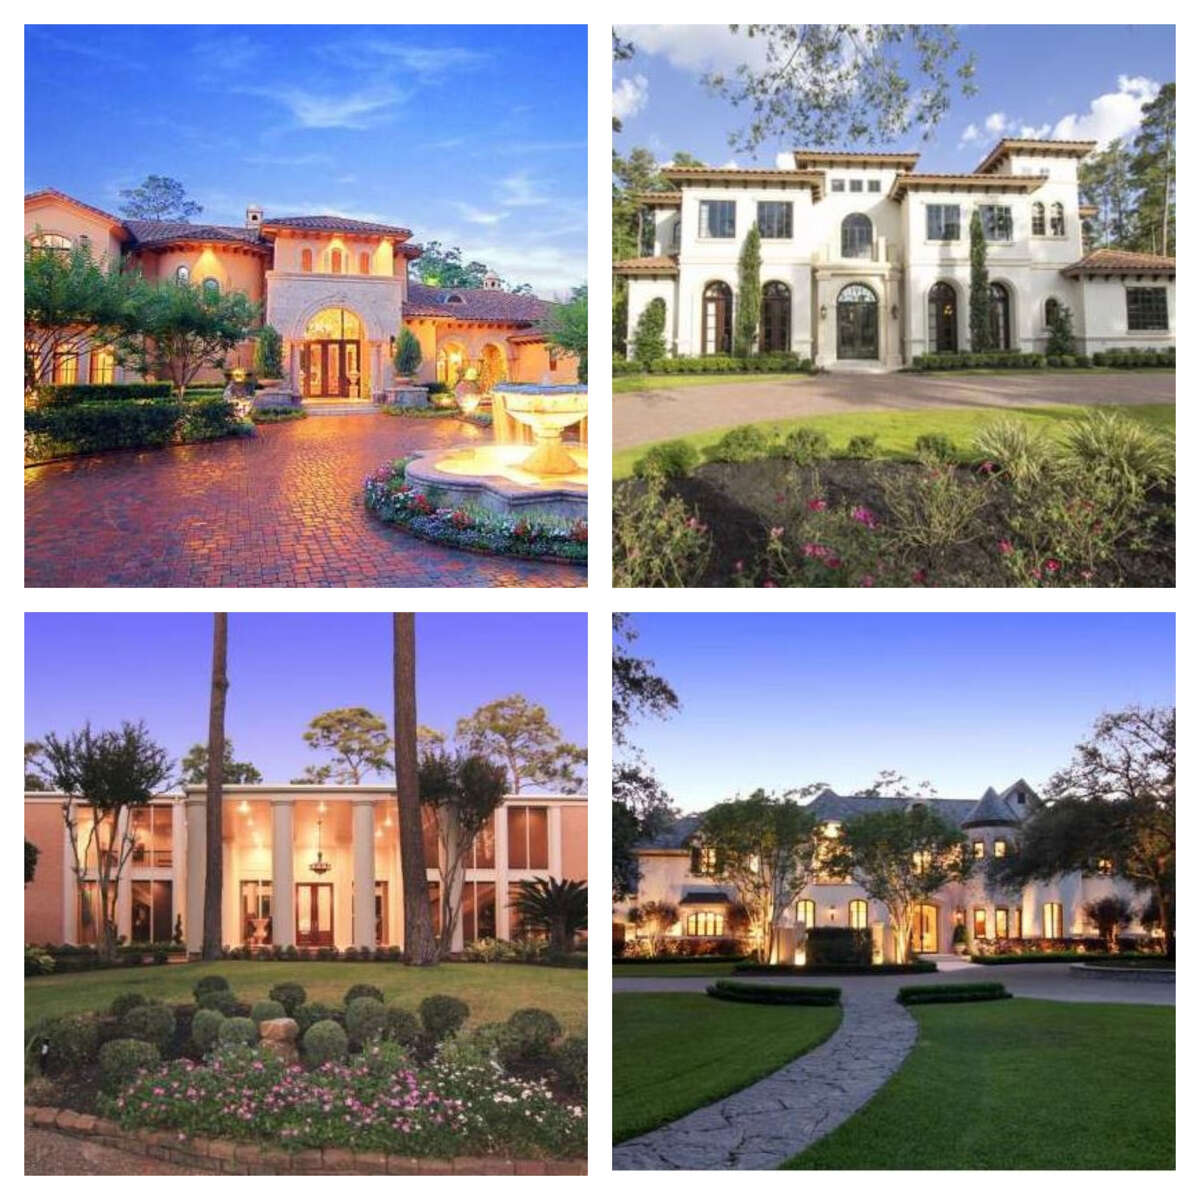 Click through to see the expensive homes of Houston's elite.